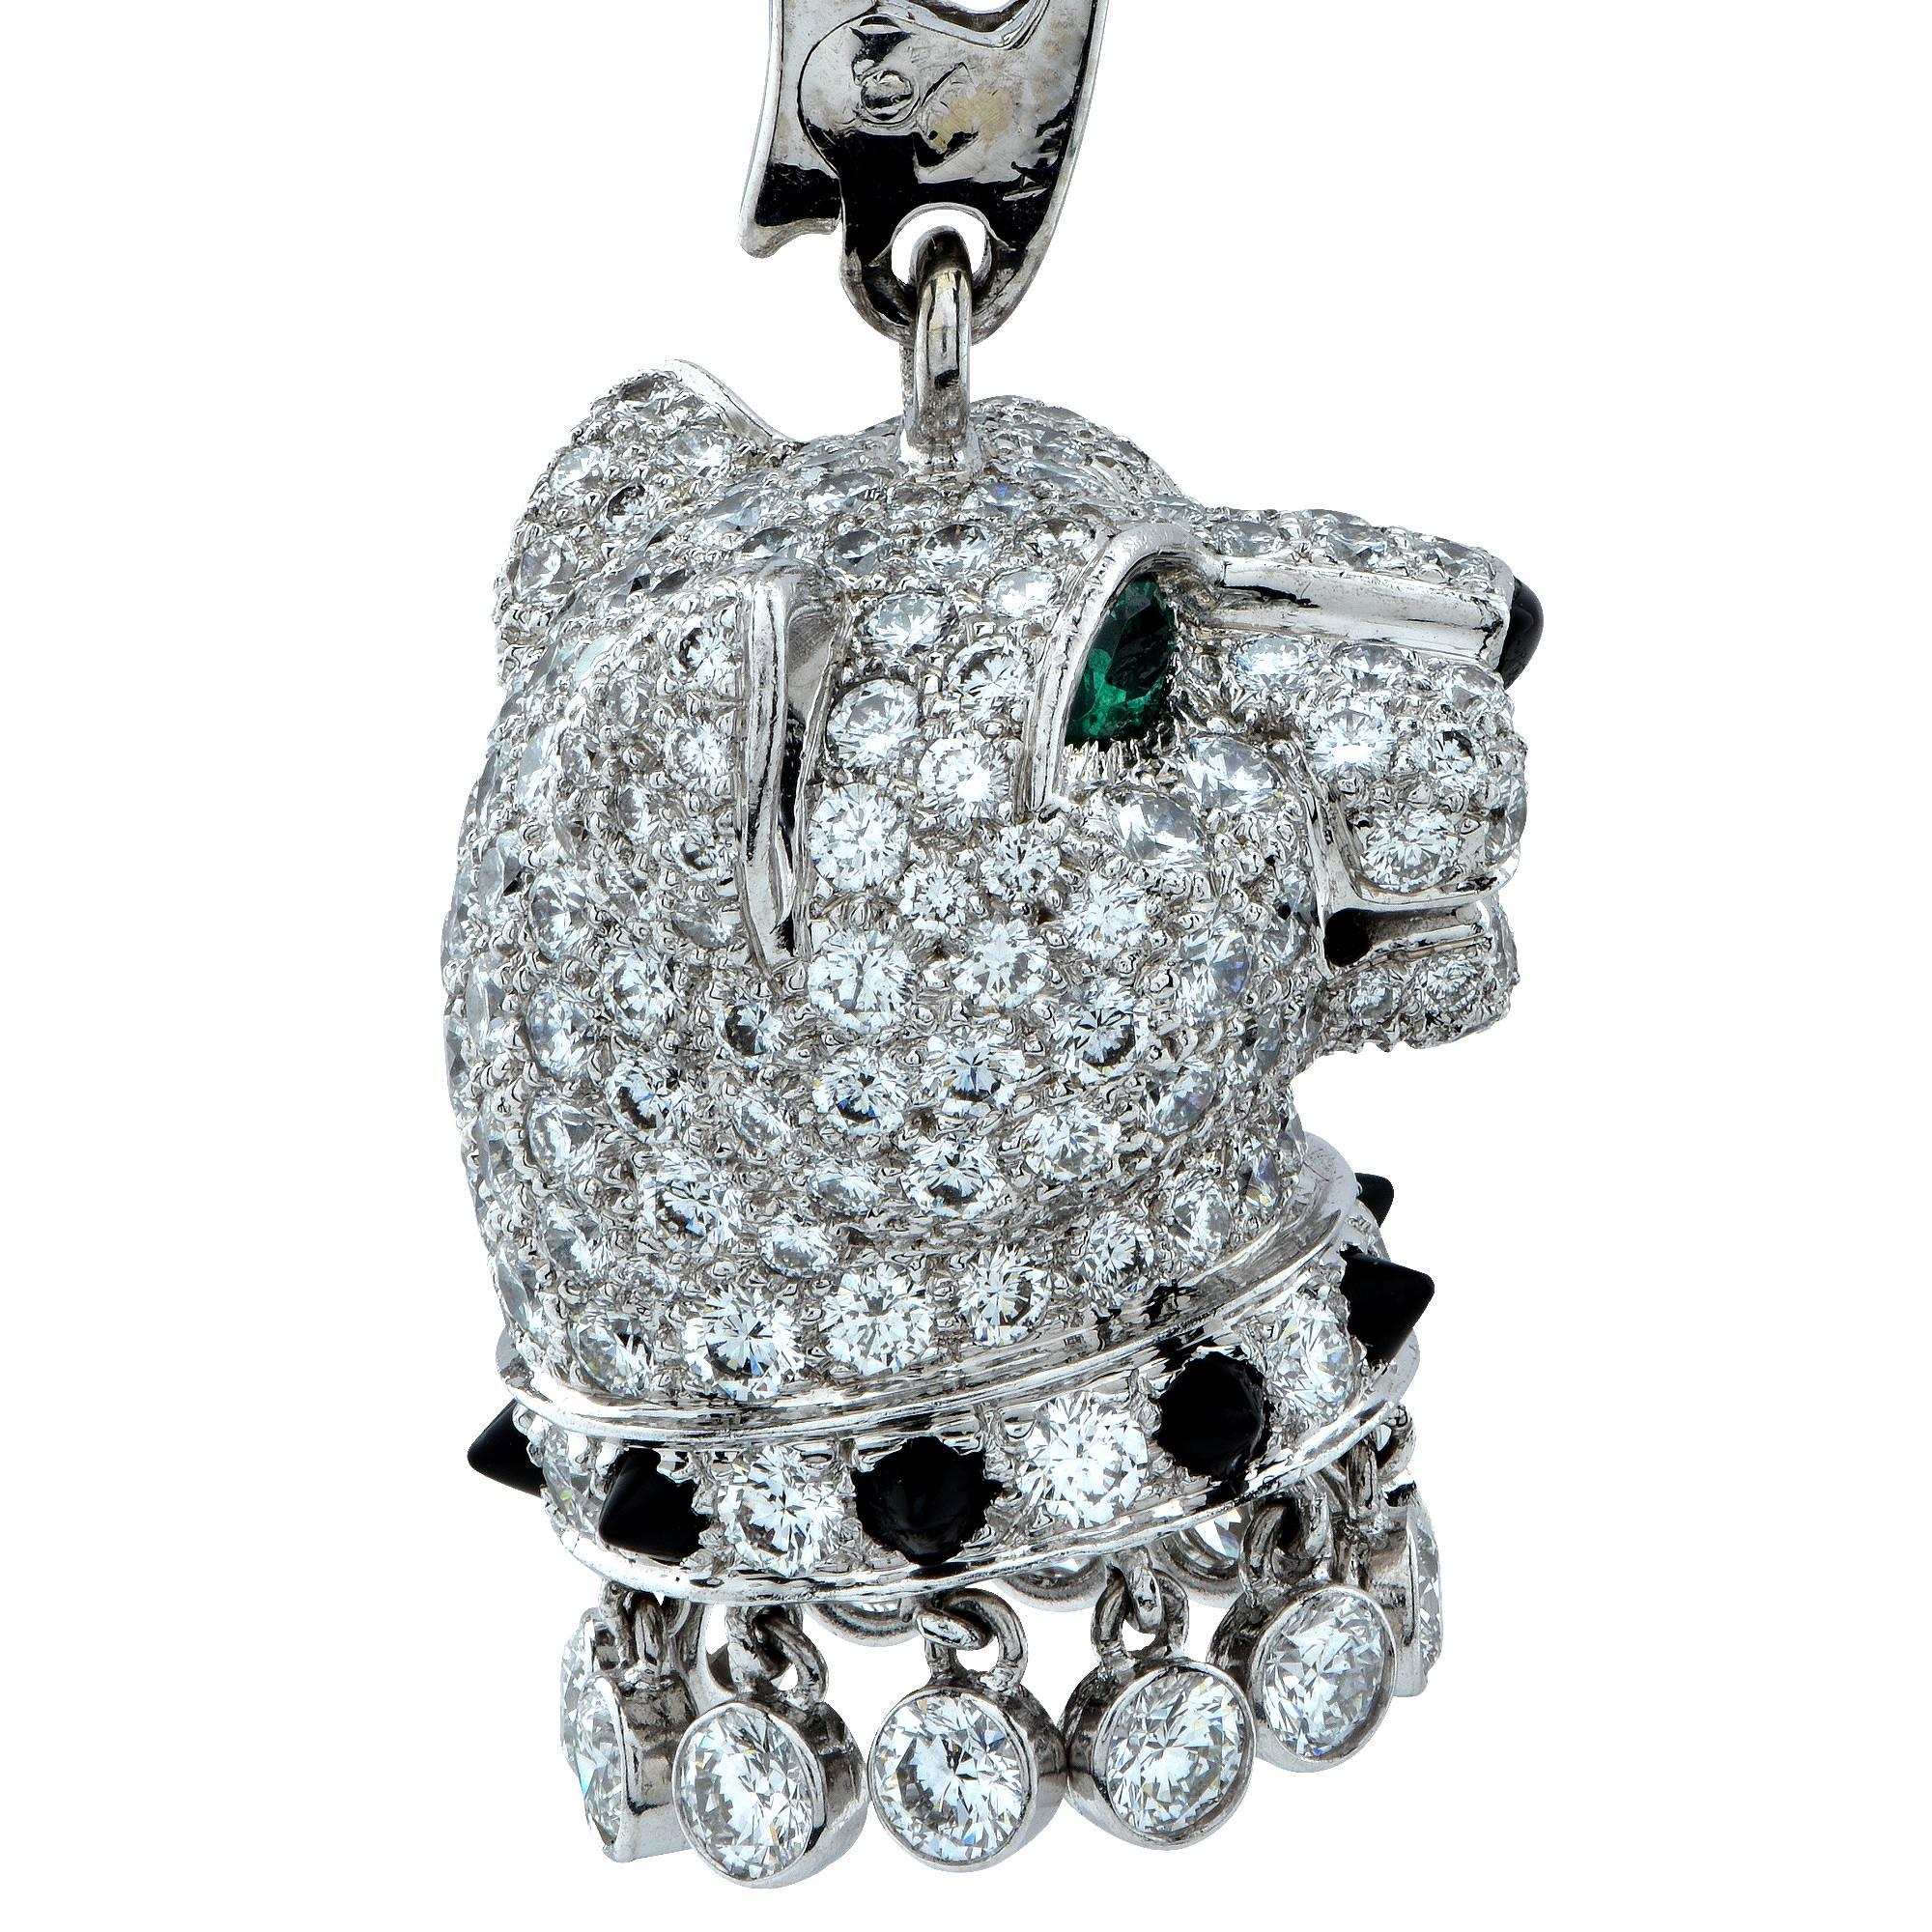 Cartier pendant from the coveted Panthere de Cartier collection, featuring a stunning panther head crafted out of 18k white gold, adorned with approximately 5 carats of round brilliant cut diamonds, F Color, VVS-VS clarity. This stunning panther has